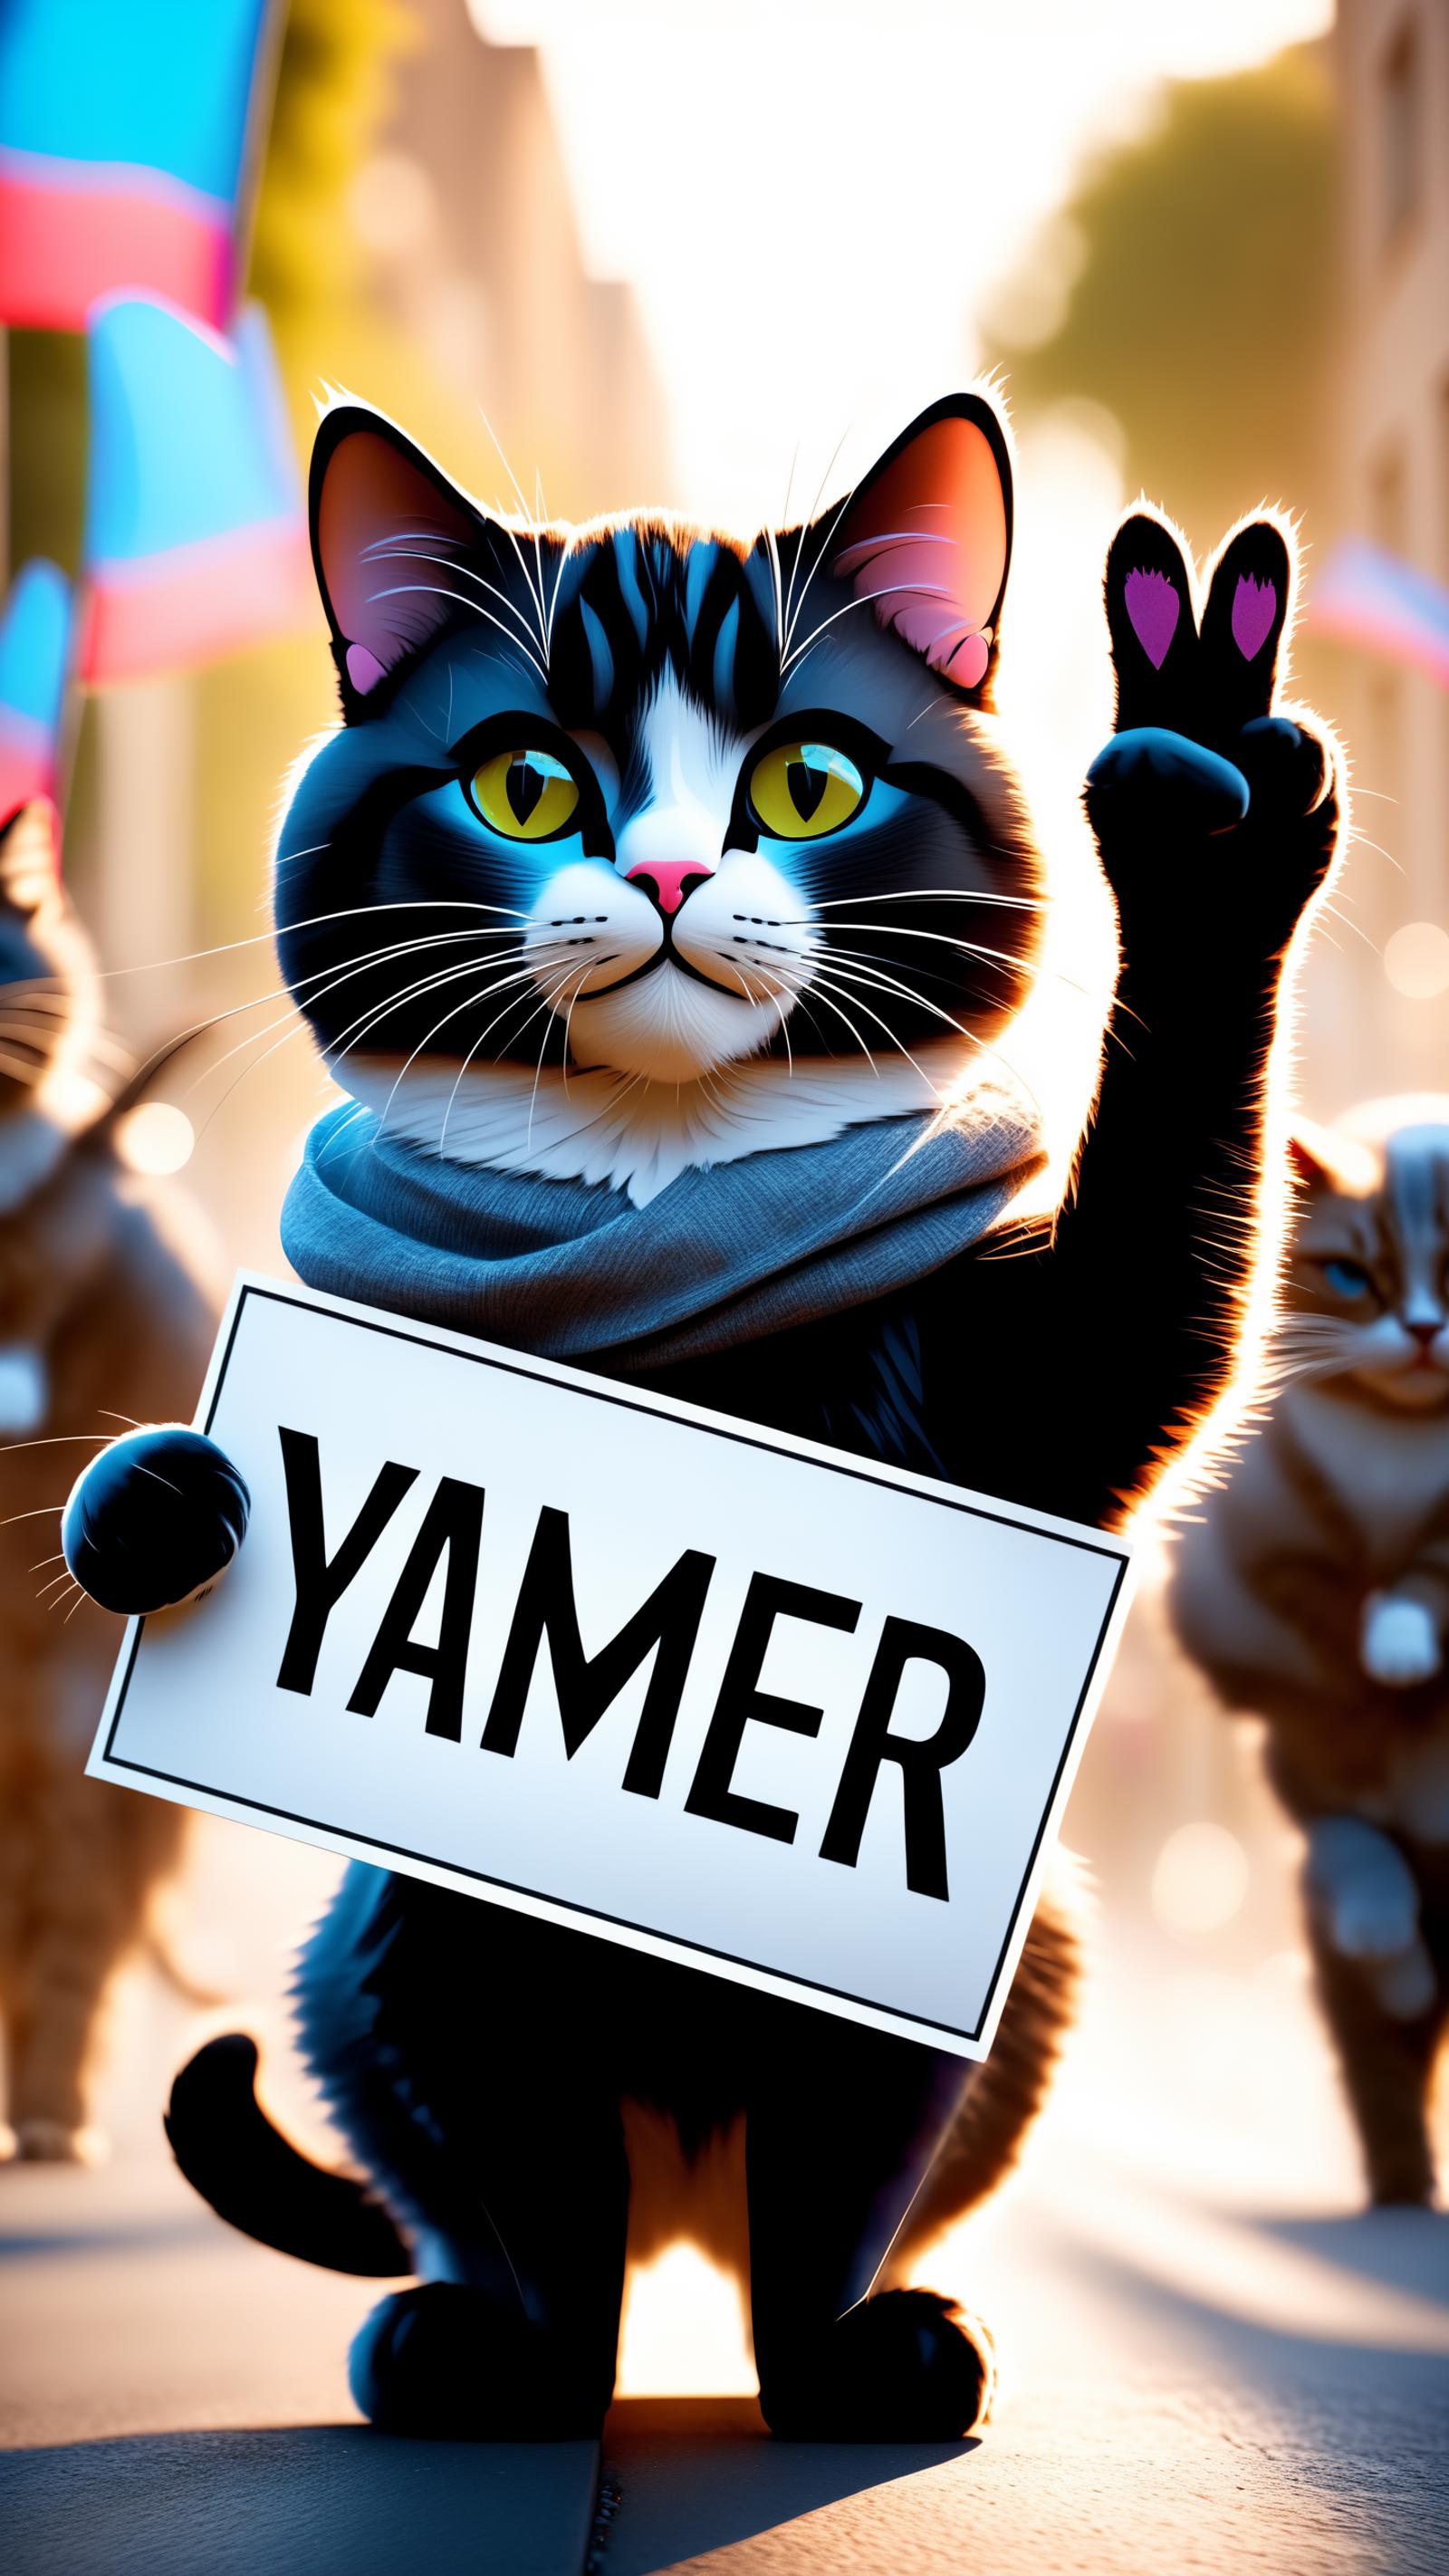 A sign with the word Yammer on it, with a cat standing next to it.